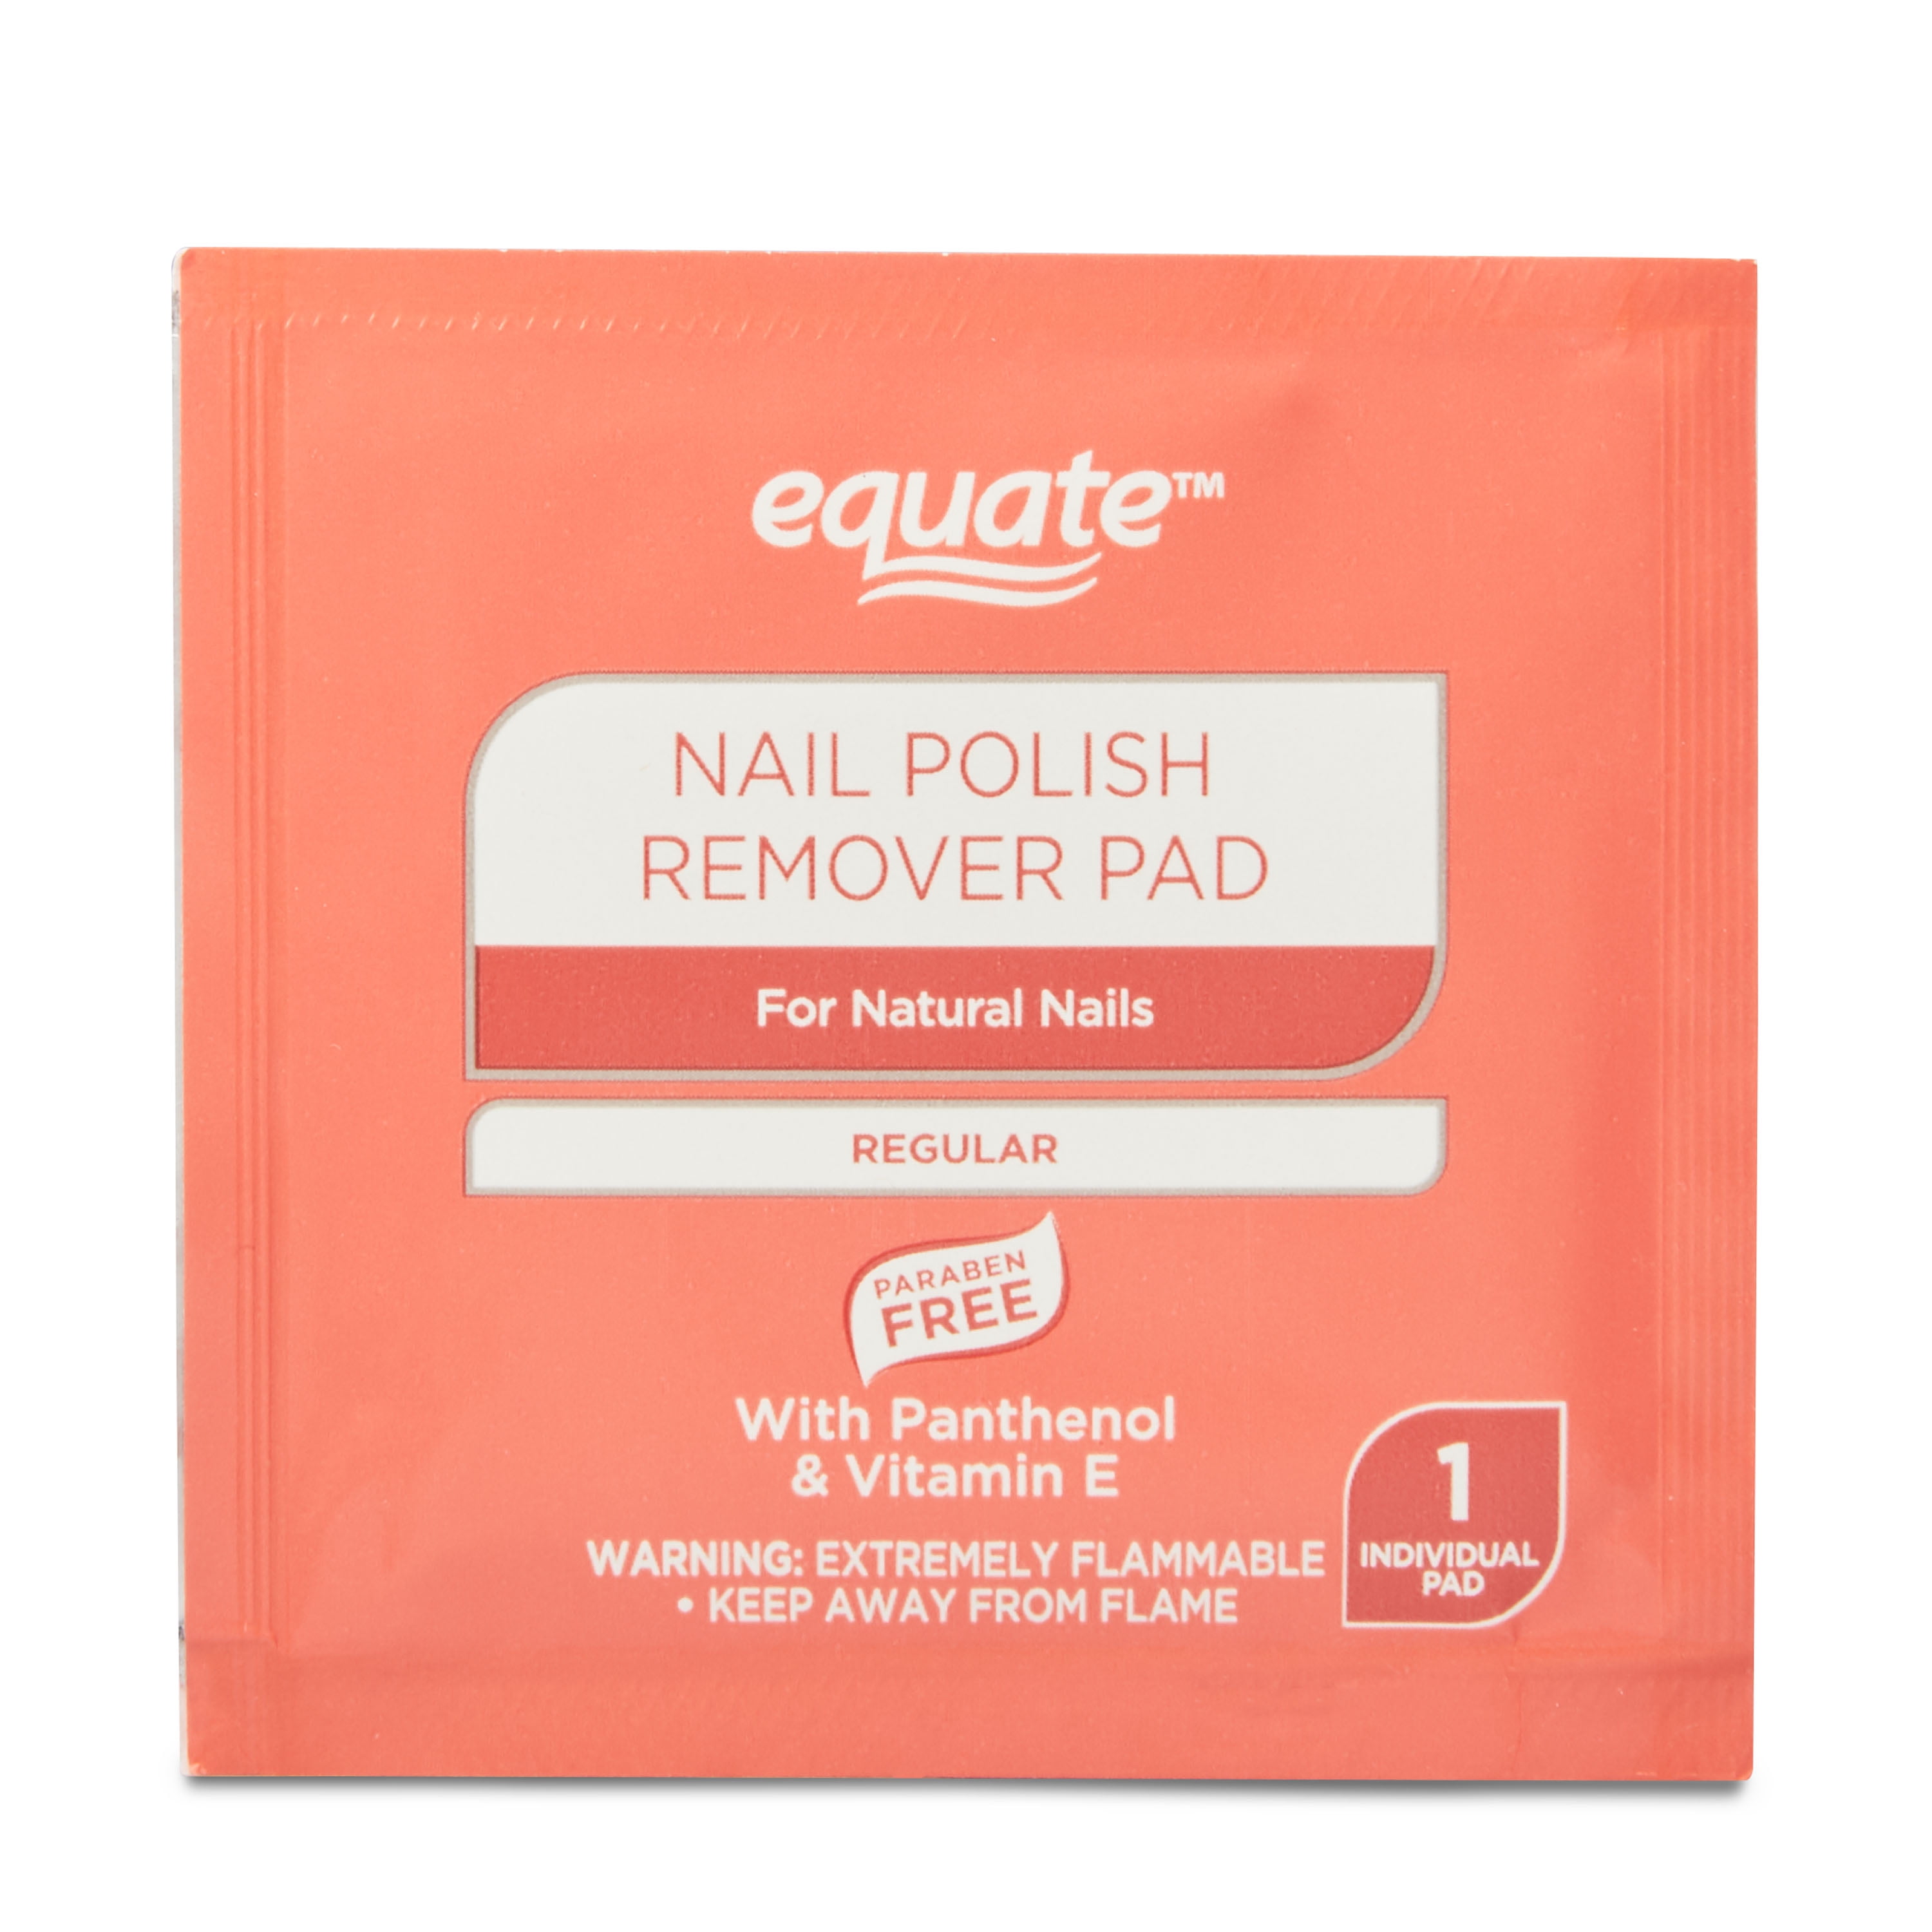 Equate Beauty Regular Nail Polish Remover Pads, 10 Count 